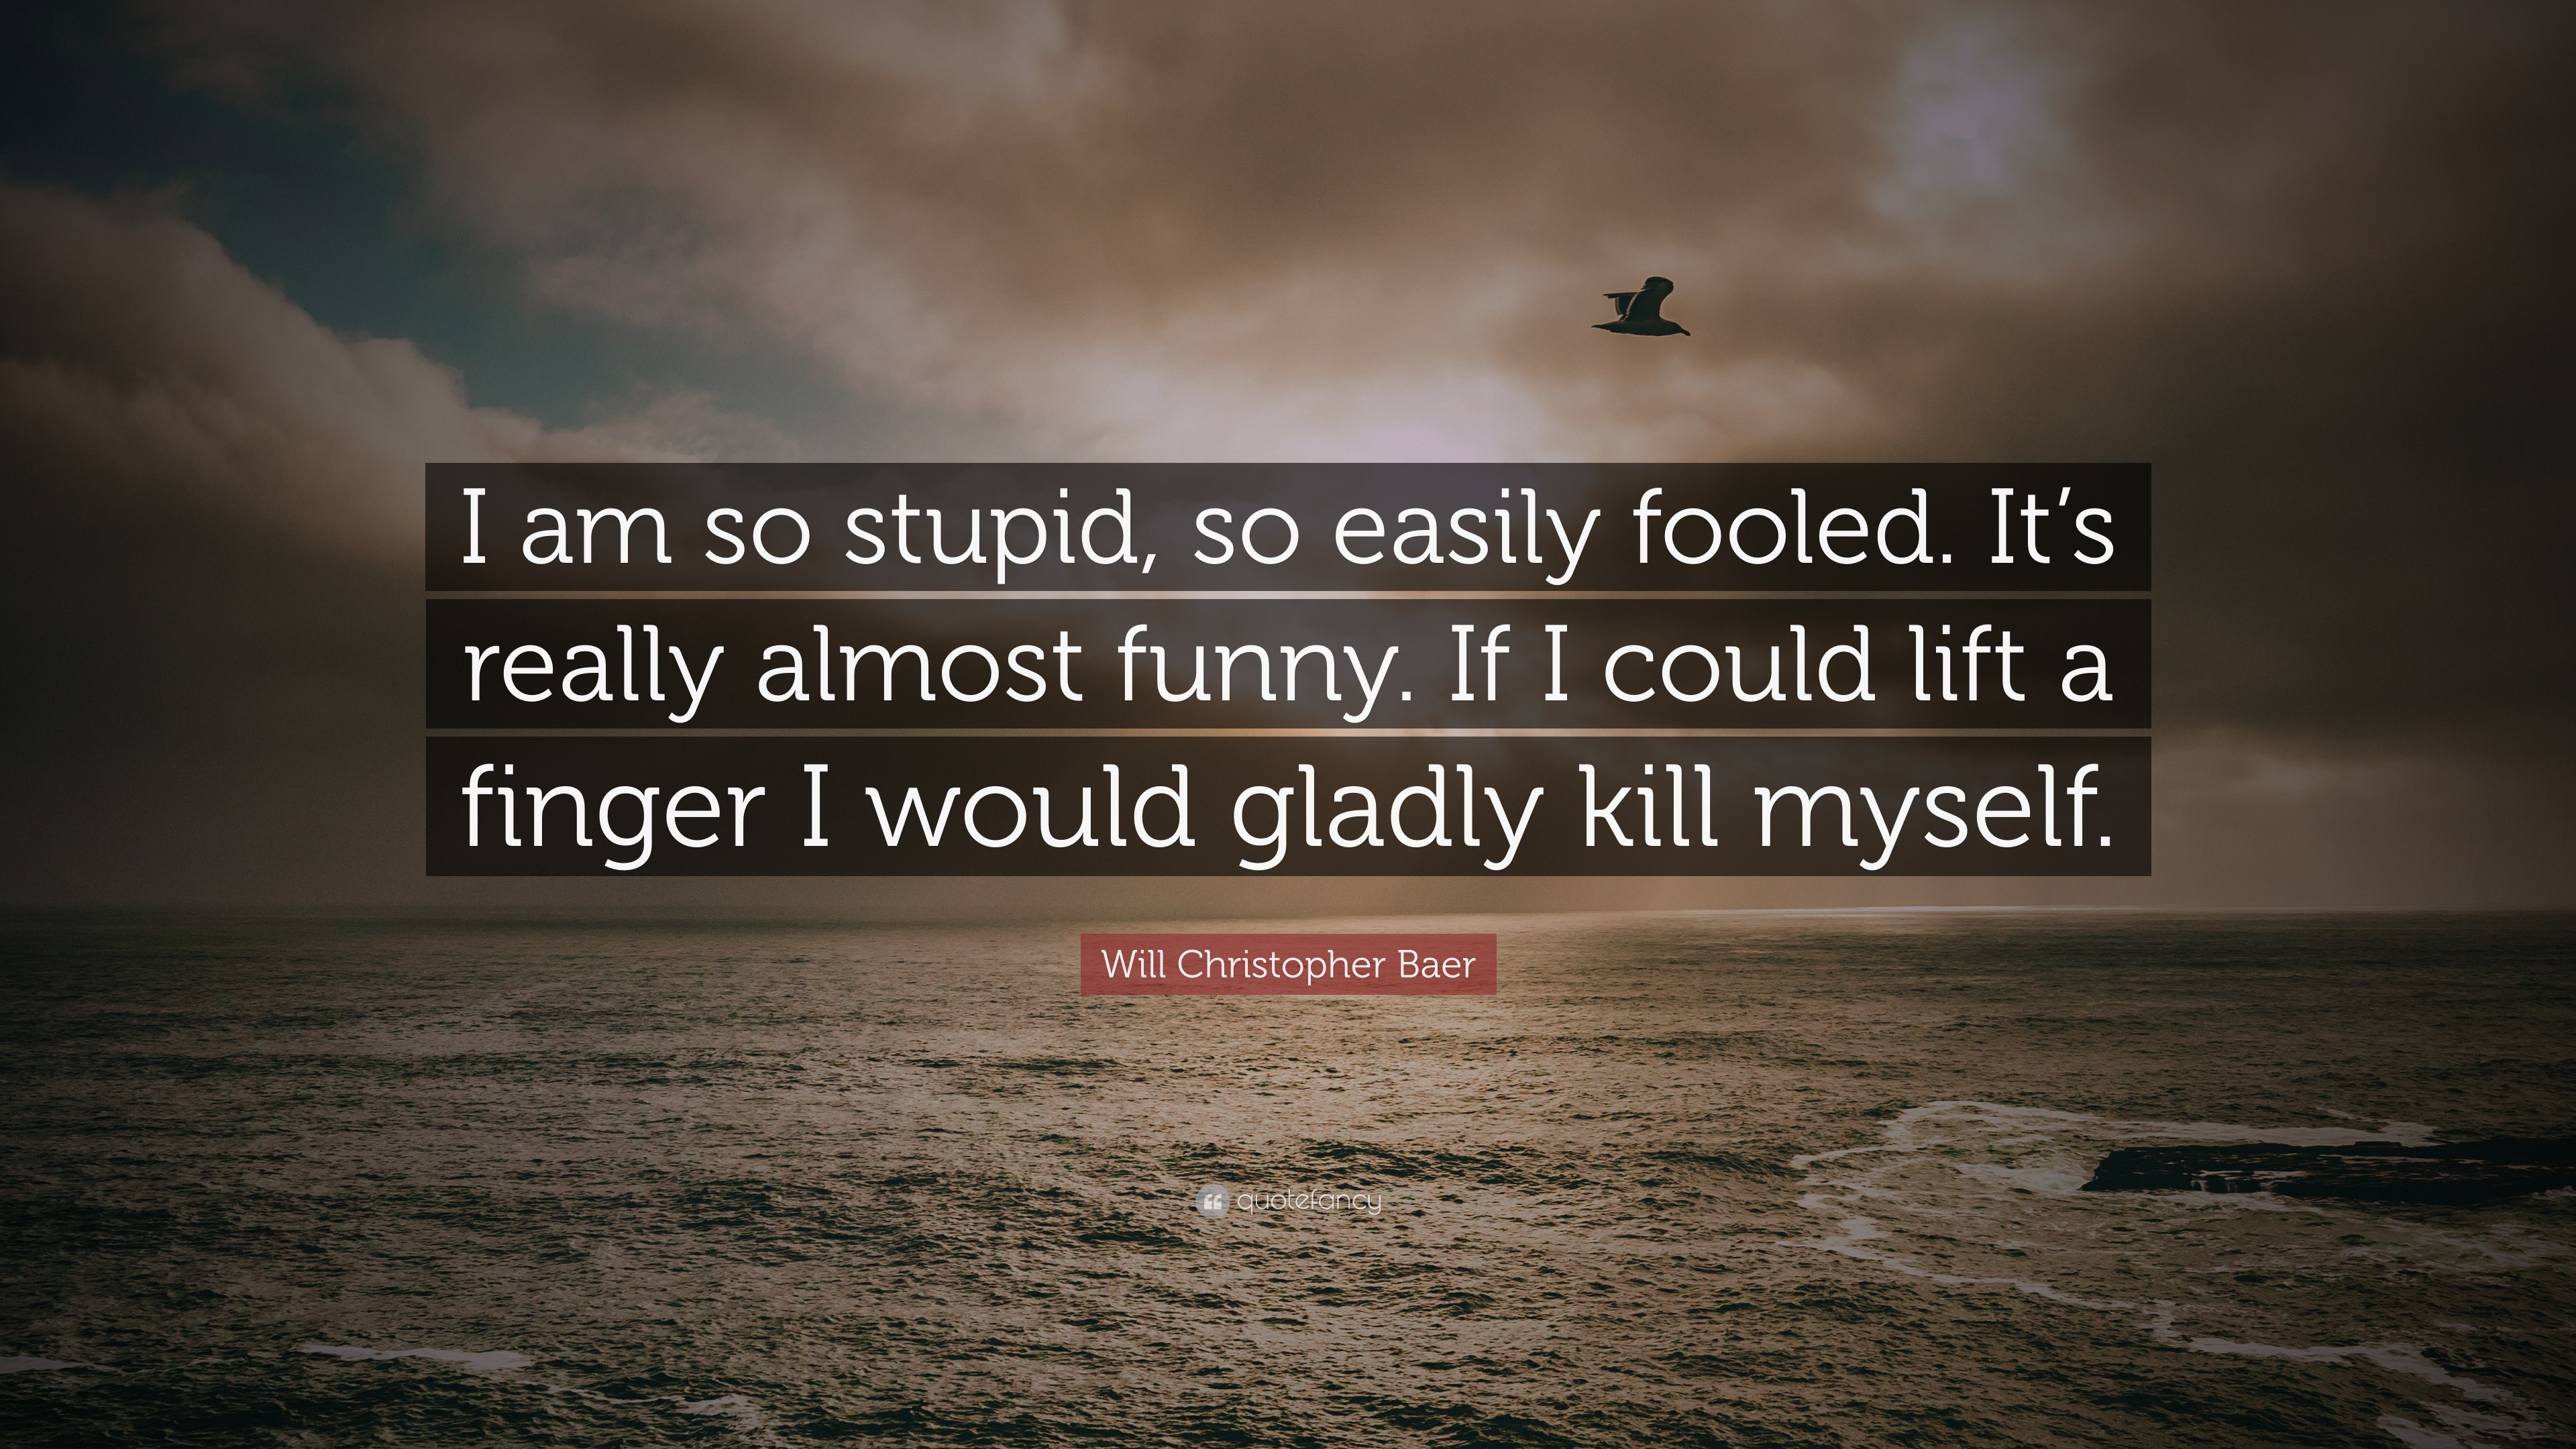 Will Christopher Baer Quote: “I am so stupid, so easily fooled. It's really  almost funny. If